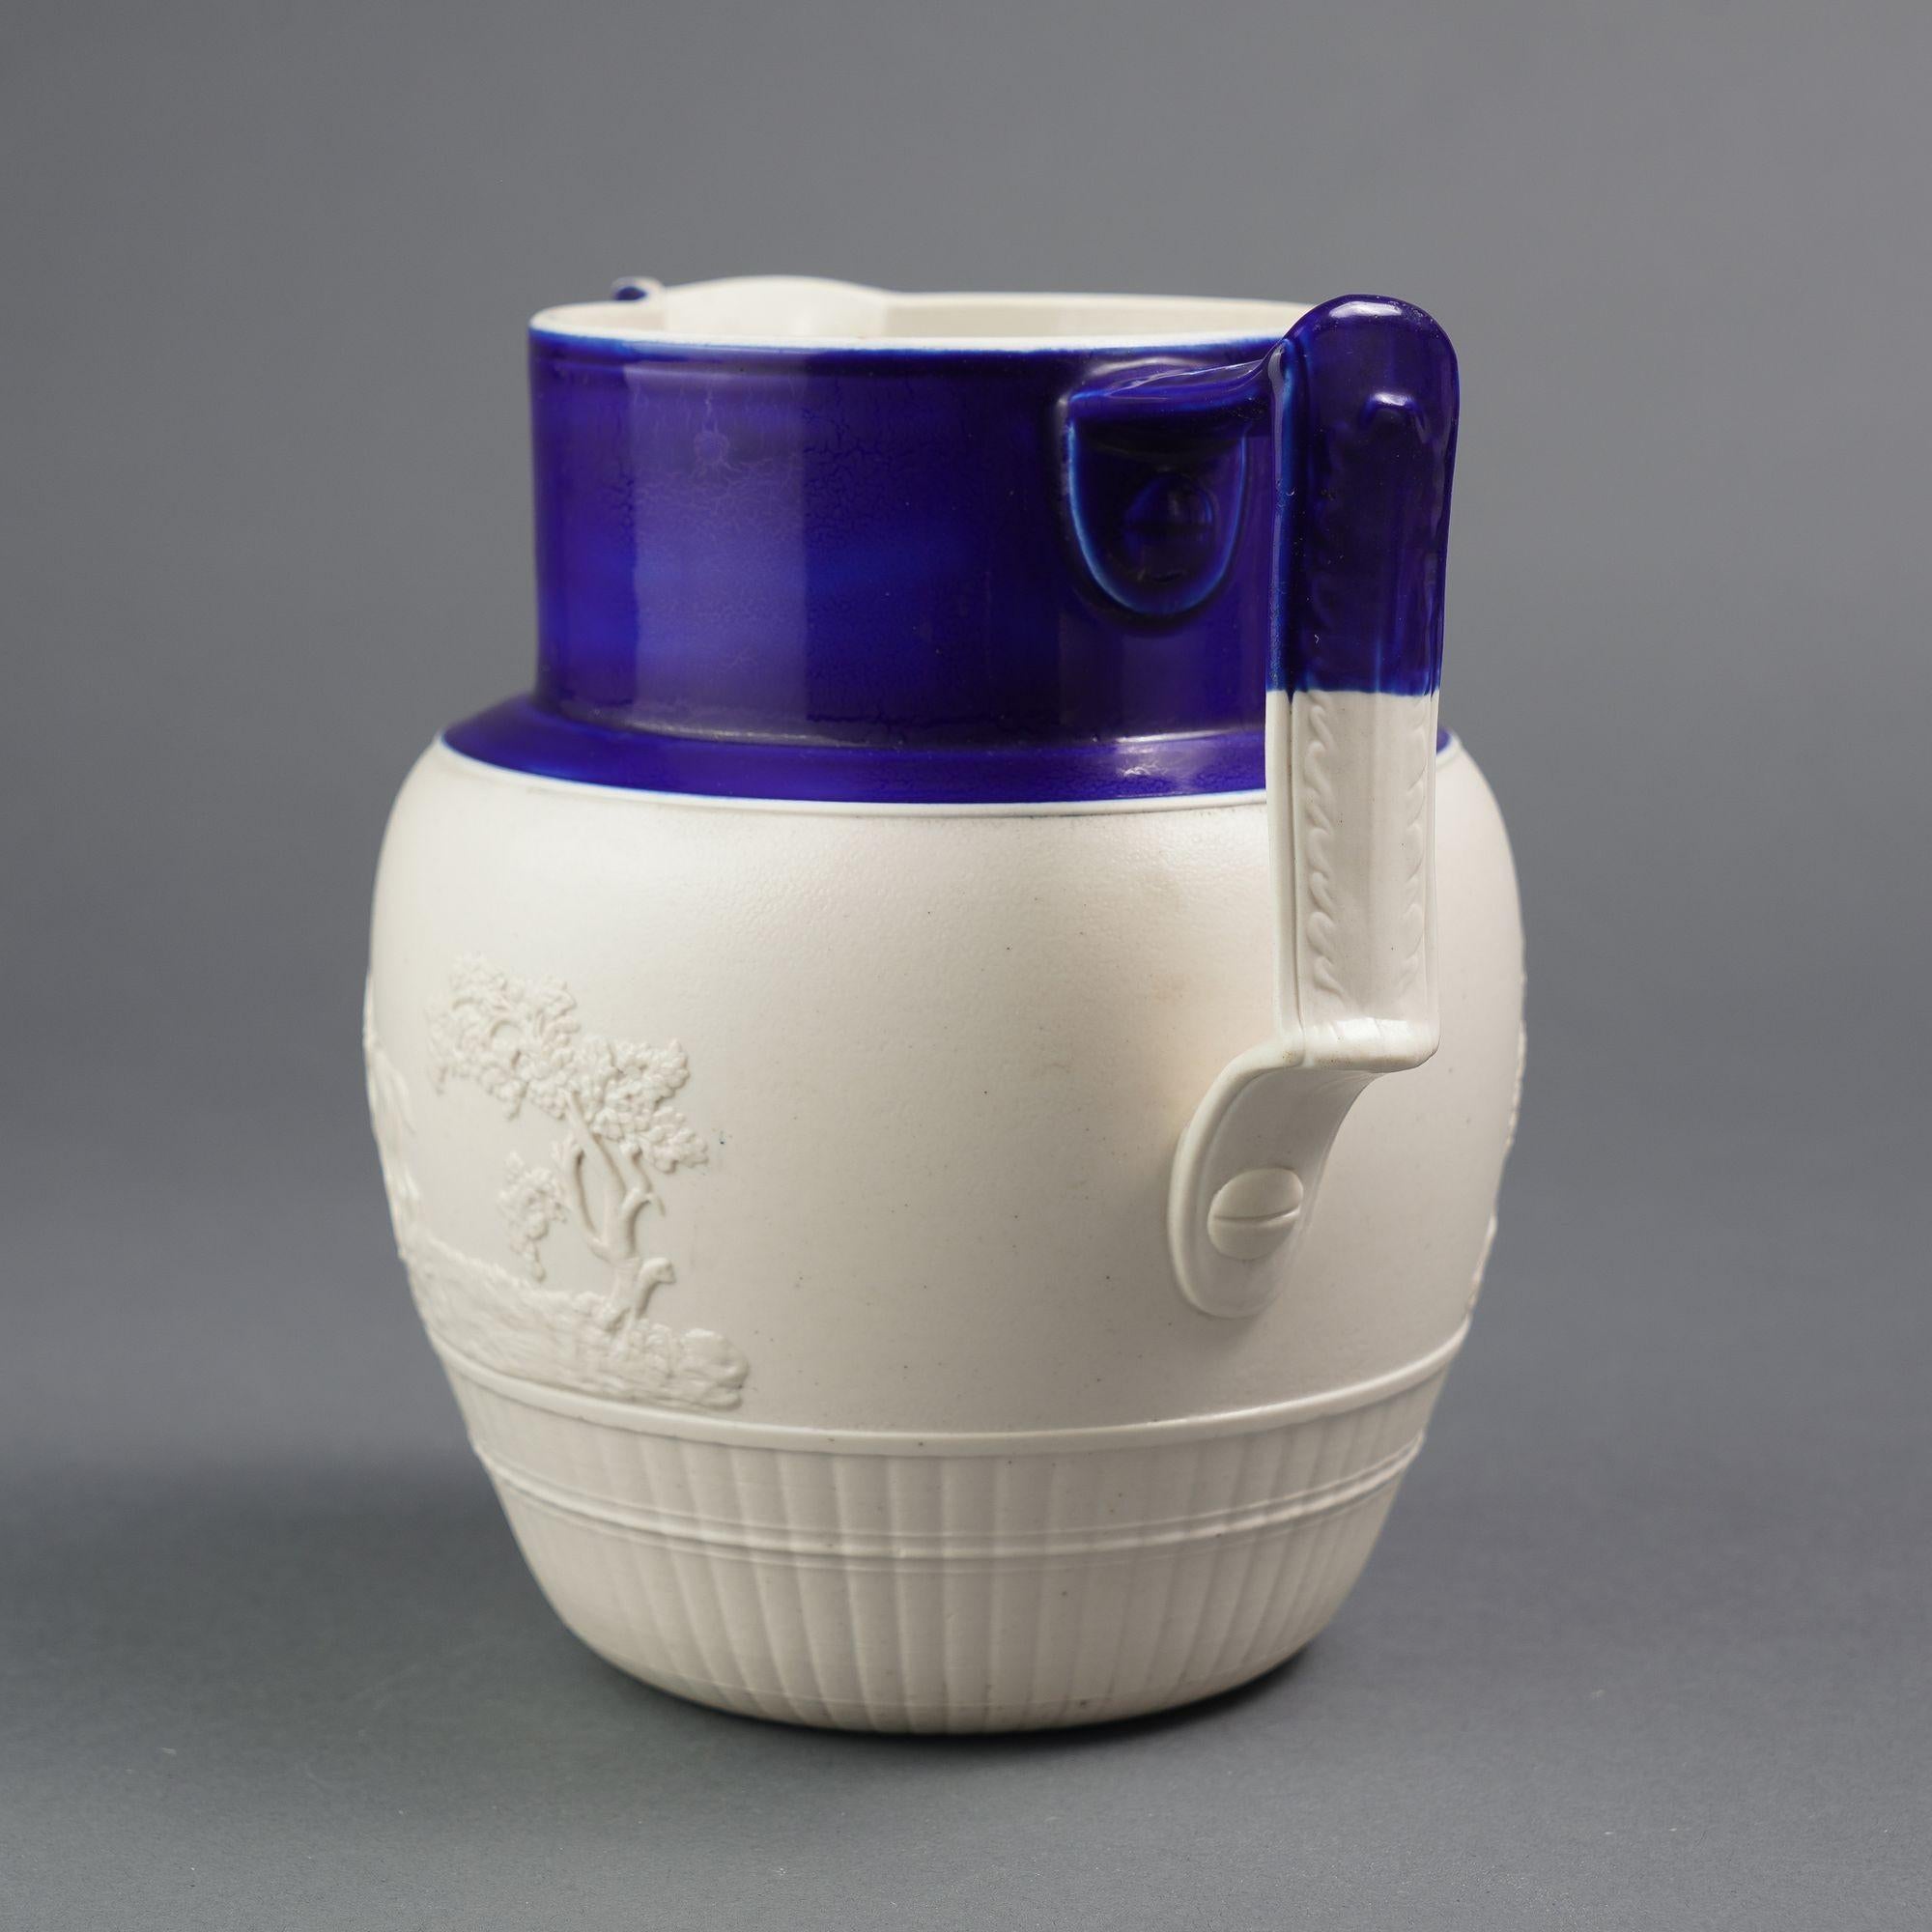 Feldspathic stoneware hunt jug with a cobalt blue enameled neck and spout. The body of the pitcher is decorated with an applied hunt scene above a melon ribbed base.

Written in graphite on the underfoot: At Cumberland Forge when Grandmother comes